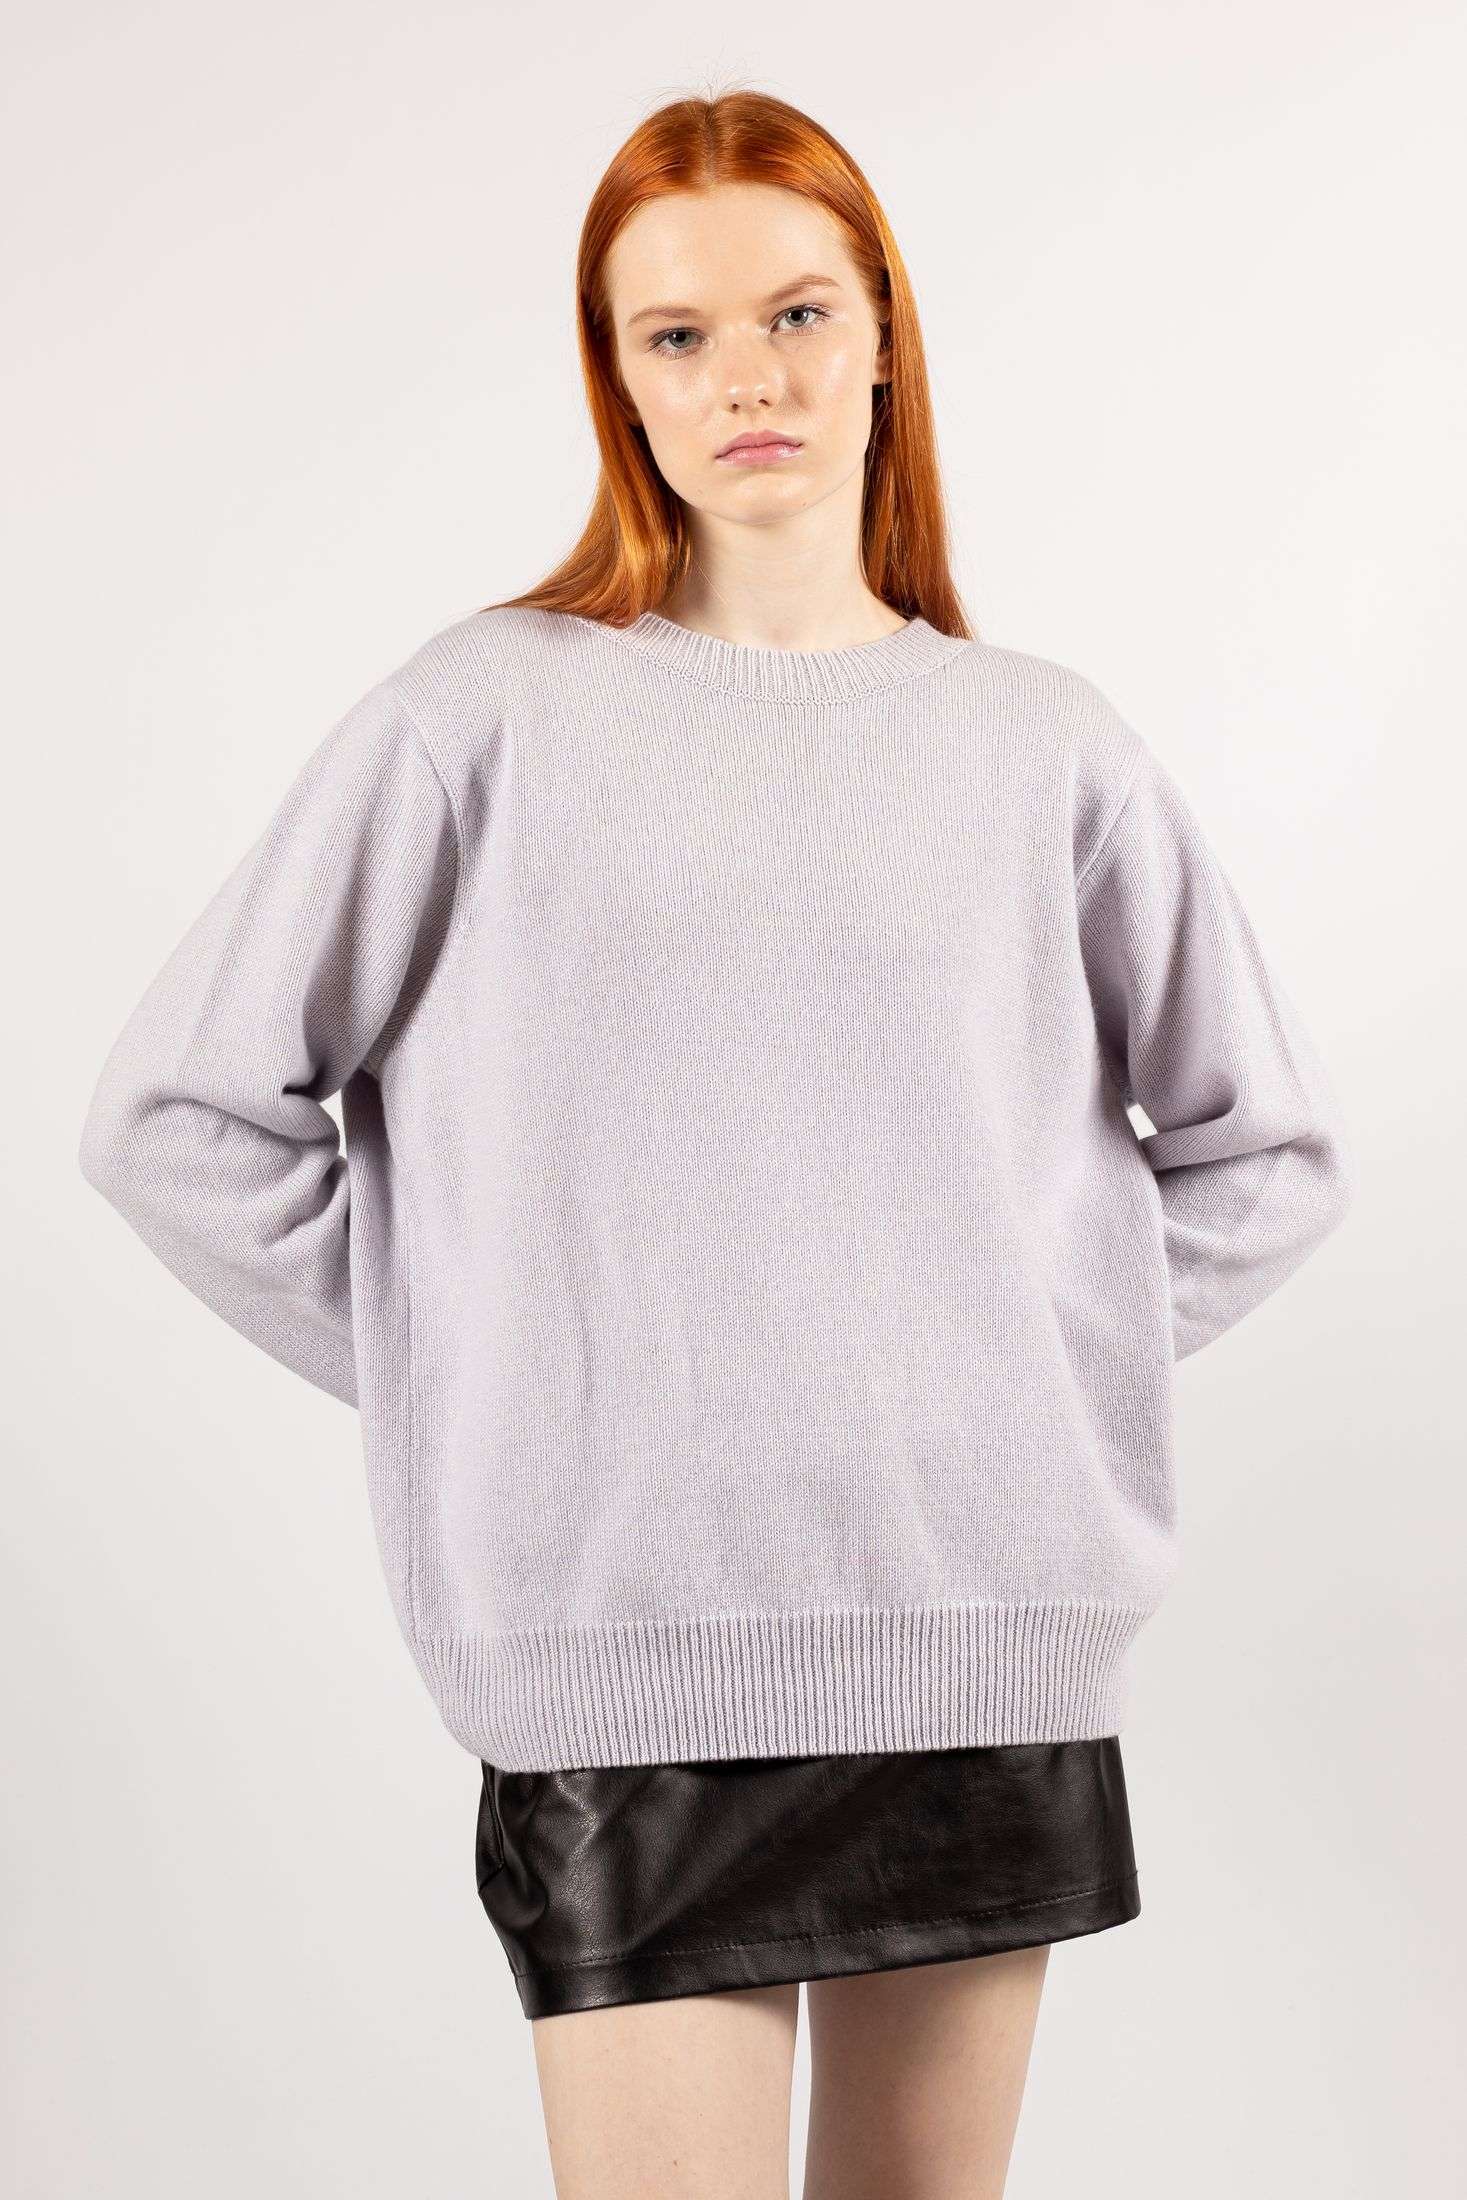 Experience the perfect blend of comfort and elegance with Frida Blue's pale blue knit.